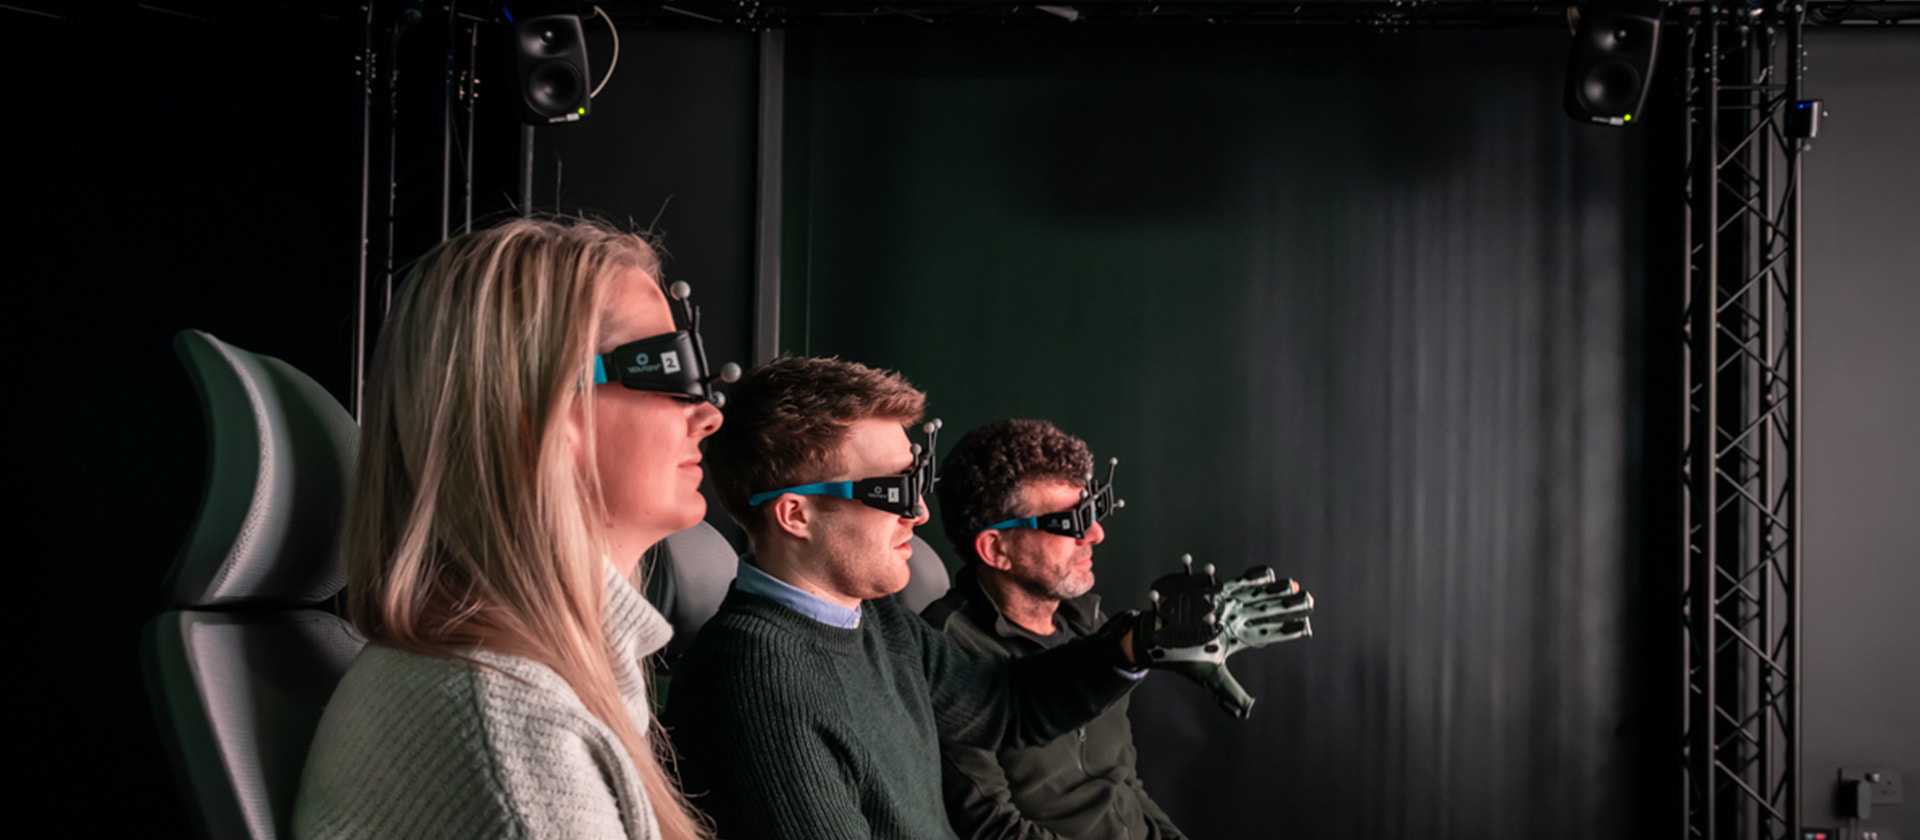 Group of people in virtual reality headsets